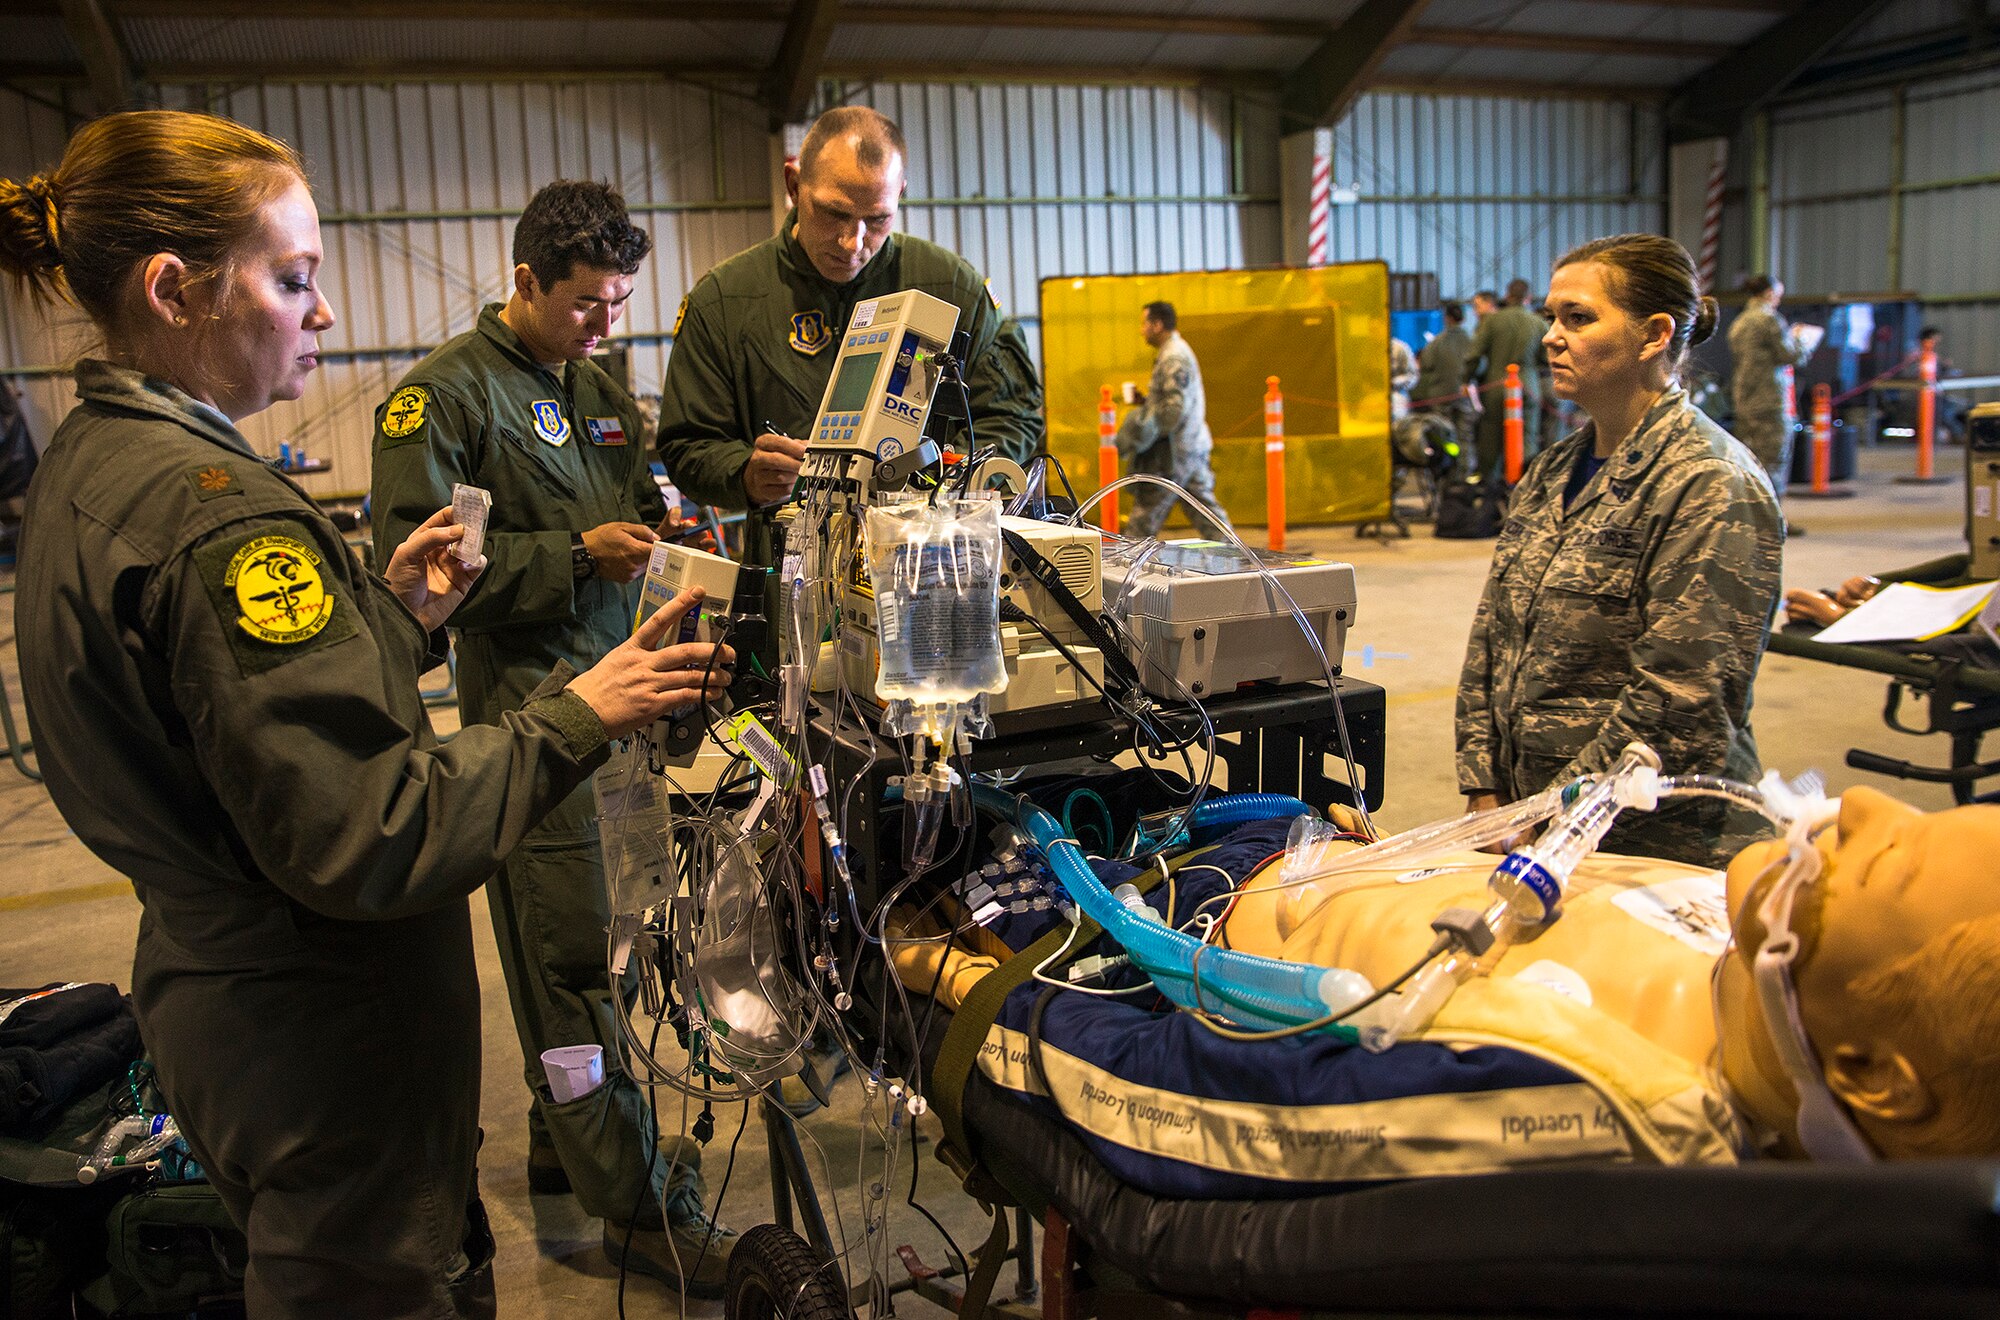 Maj. Dana Mayer, Tech. Sgt. James Bayless, and Maj. Gary Barder, 433rd Medical Squadron critical care air transport team, use a portable ICU to stabalize a simulated patient before loading them onto a C-130 Hercules aircraft from Youngstown Air Reserve Station, Ohio during exercise Patriot Hook April 28, 2017 at Vandenberg Air Force Base. Patriot Hook is an annual joint-service exercise coordinated by the Air Force Reserve, designed to integrate the military and first responders of federal, state and local agencies by providing training to mobilize quickly and deploying in military aircraft in the event of a regional emergency or natural disaster. (U.S. Air Force photo by Benjamin Faske)